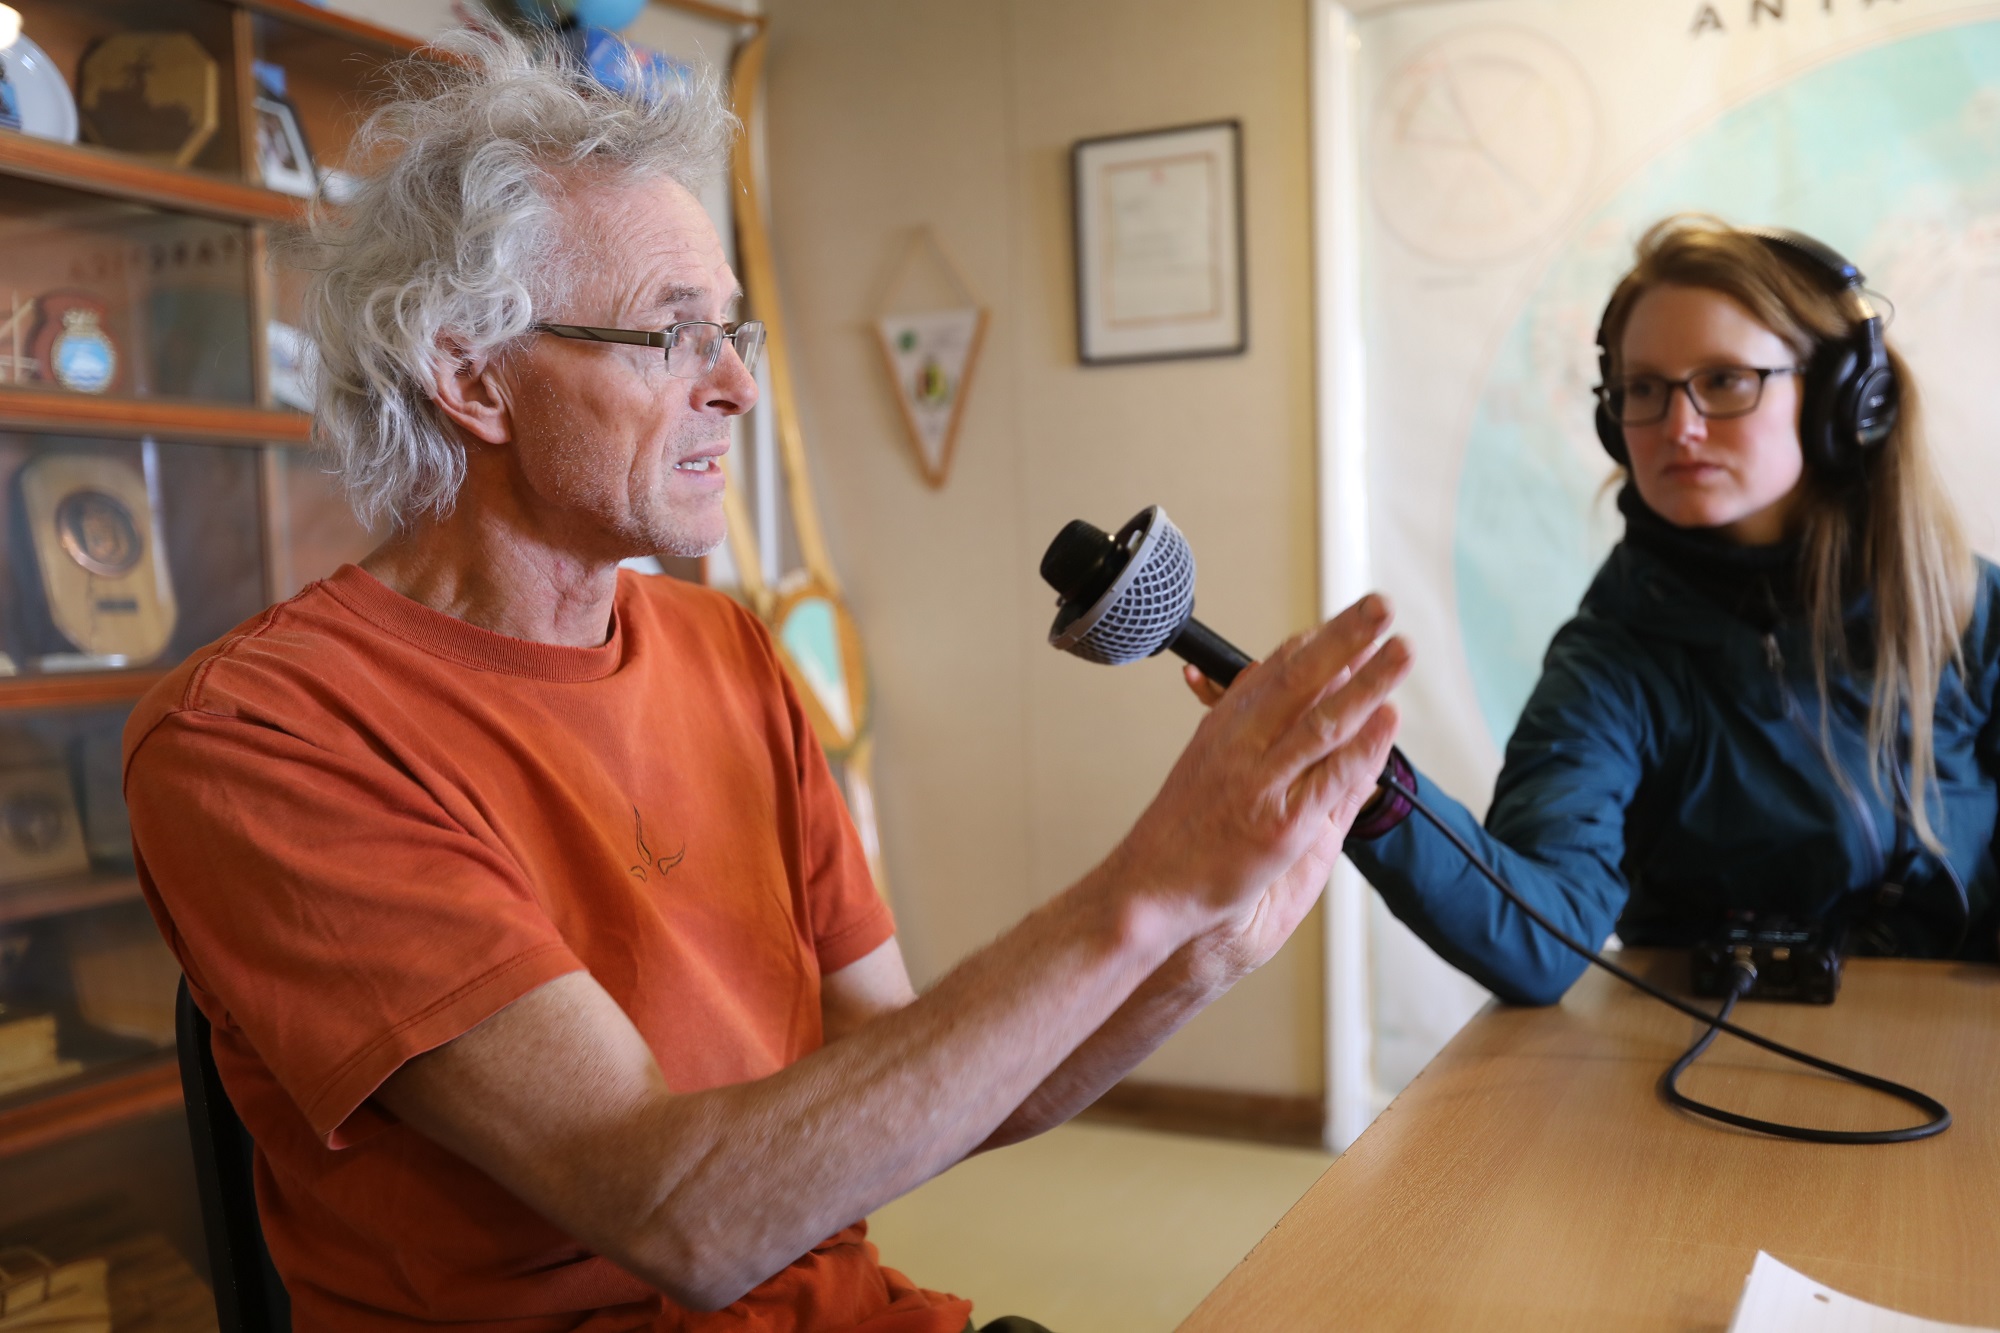 Researcher Andy Smith speaks with journalist Carolyn Beeler at Rothera Station. Photo credit: Linda Welzenbach